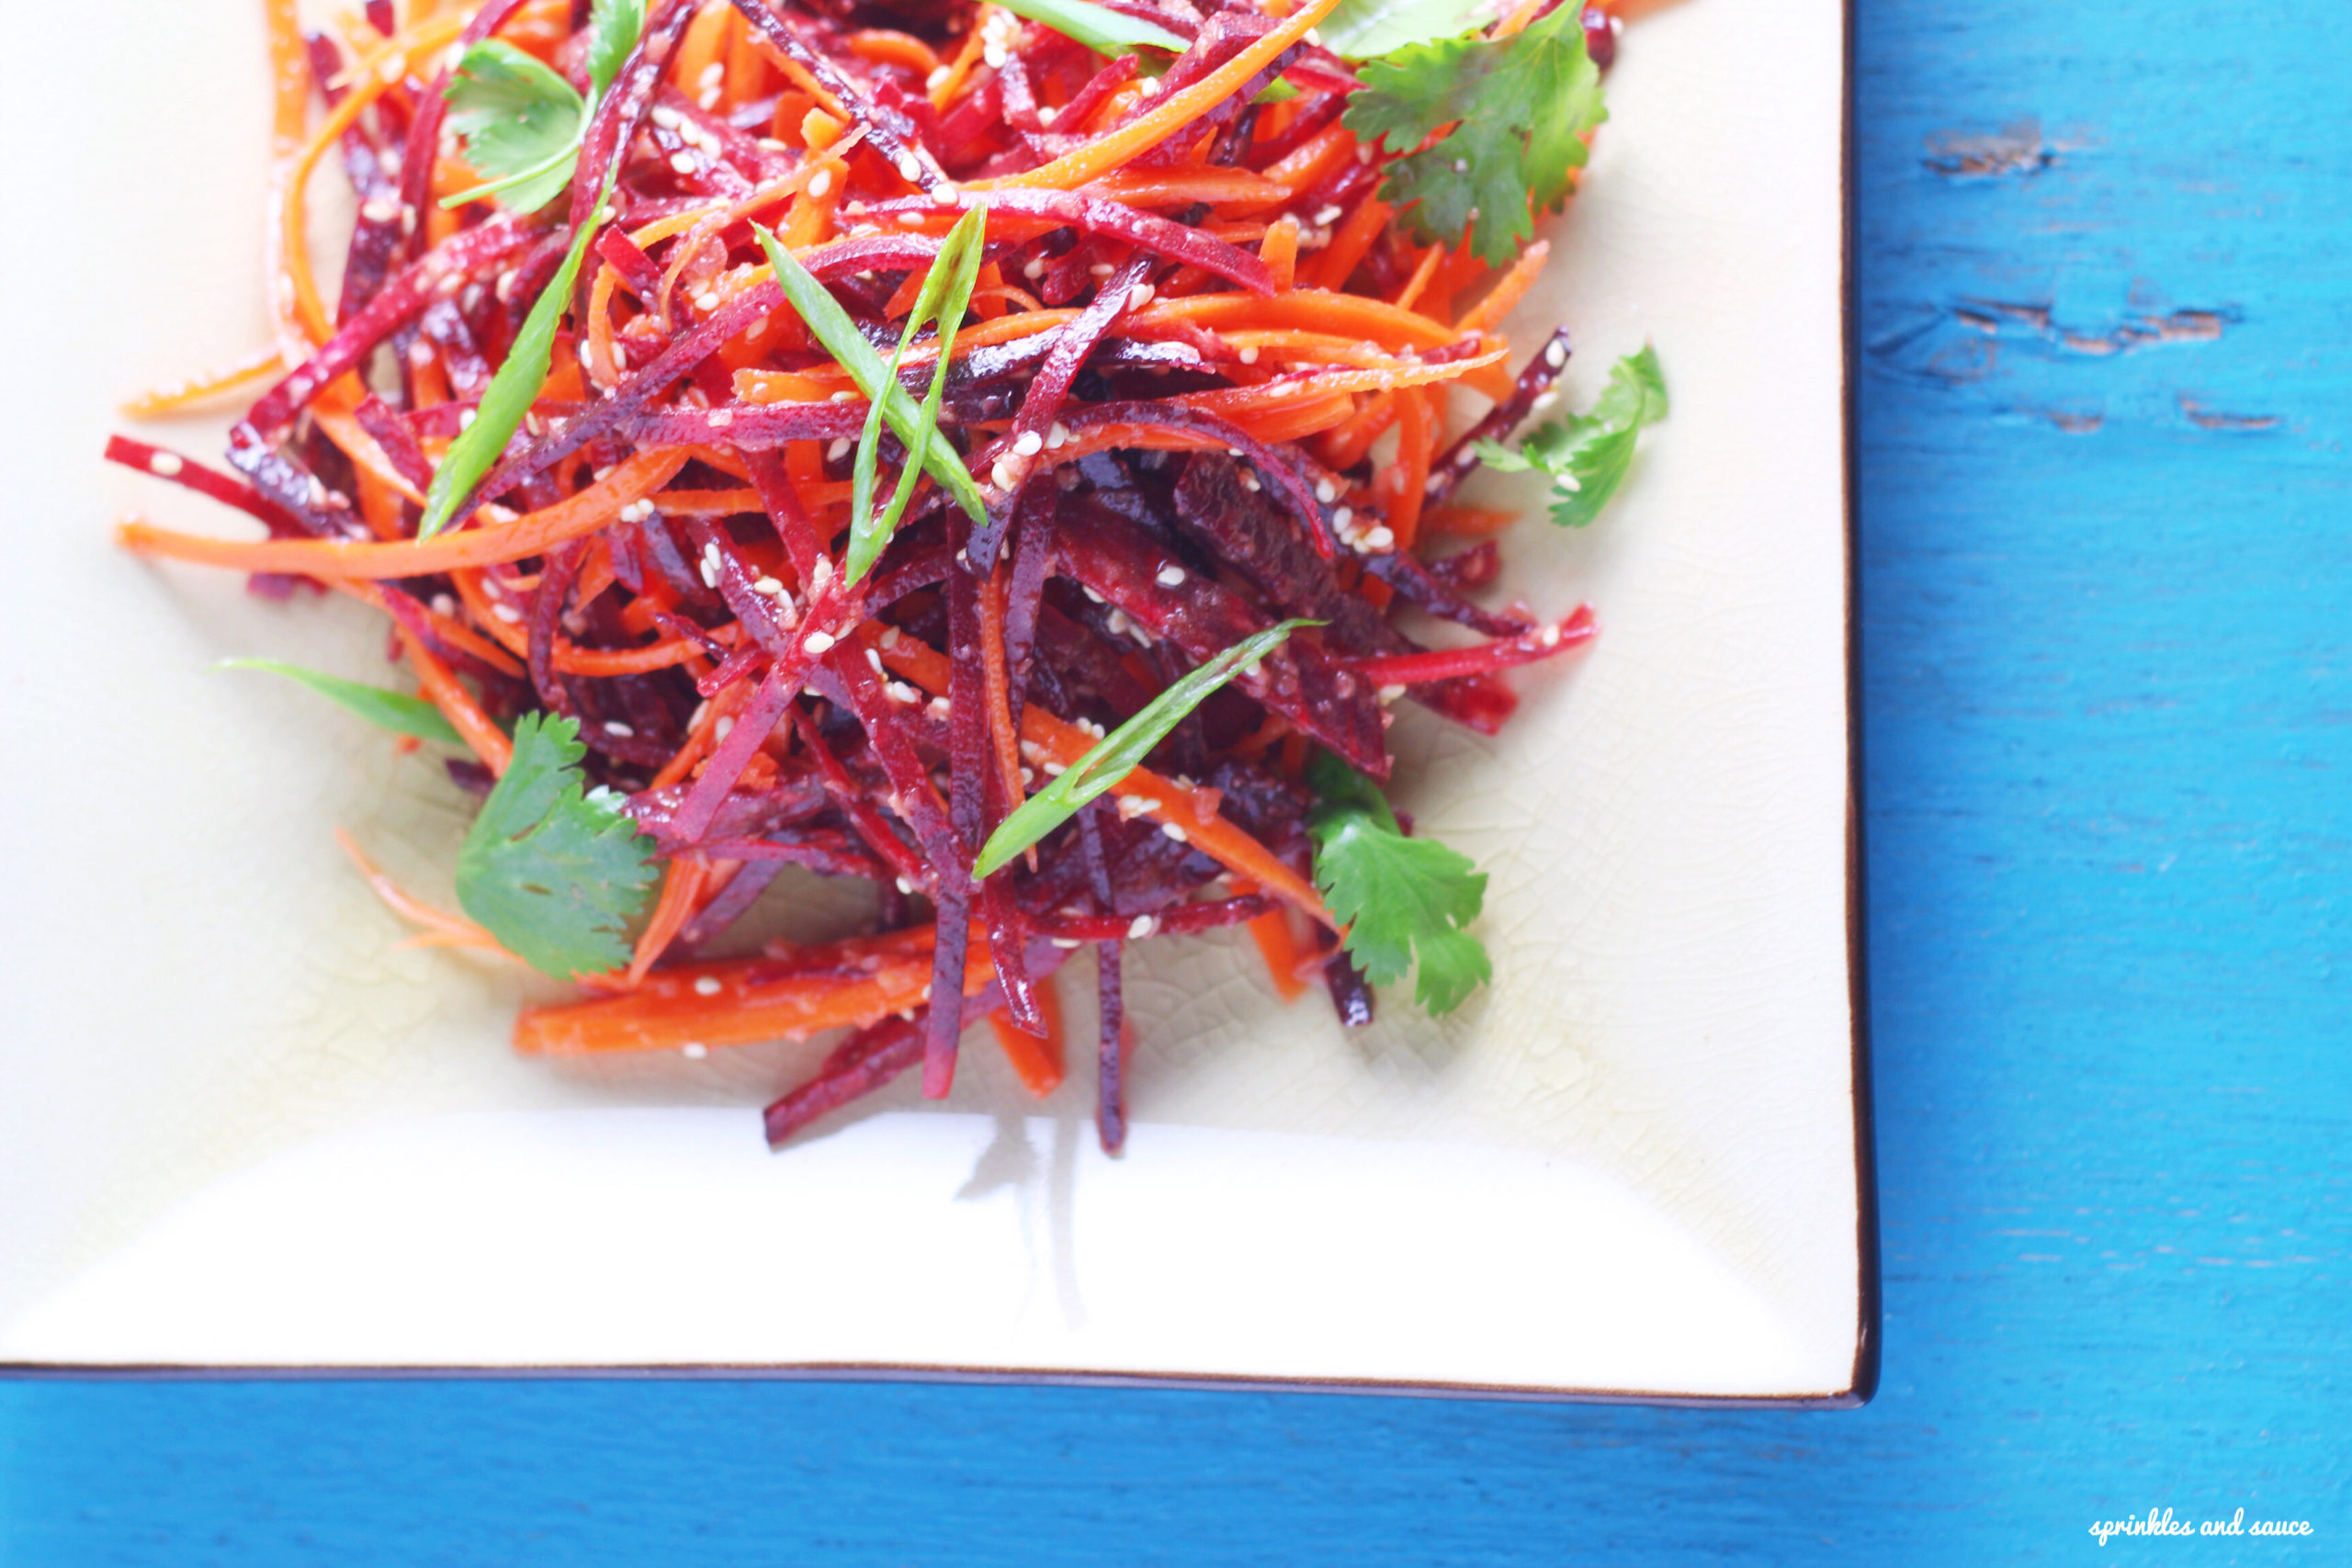 Carrot and Beet Salad with Ginger Vinaigrette